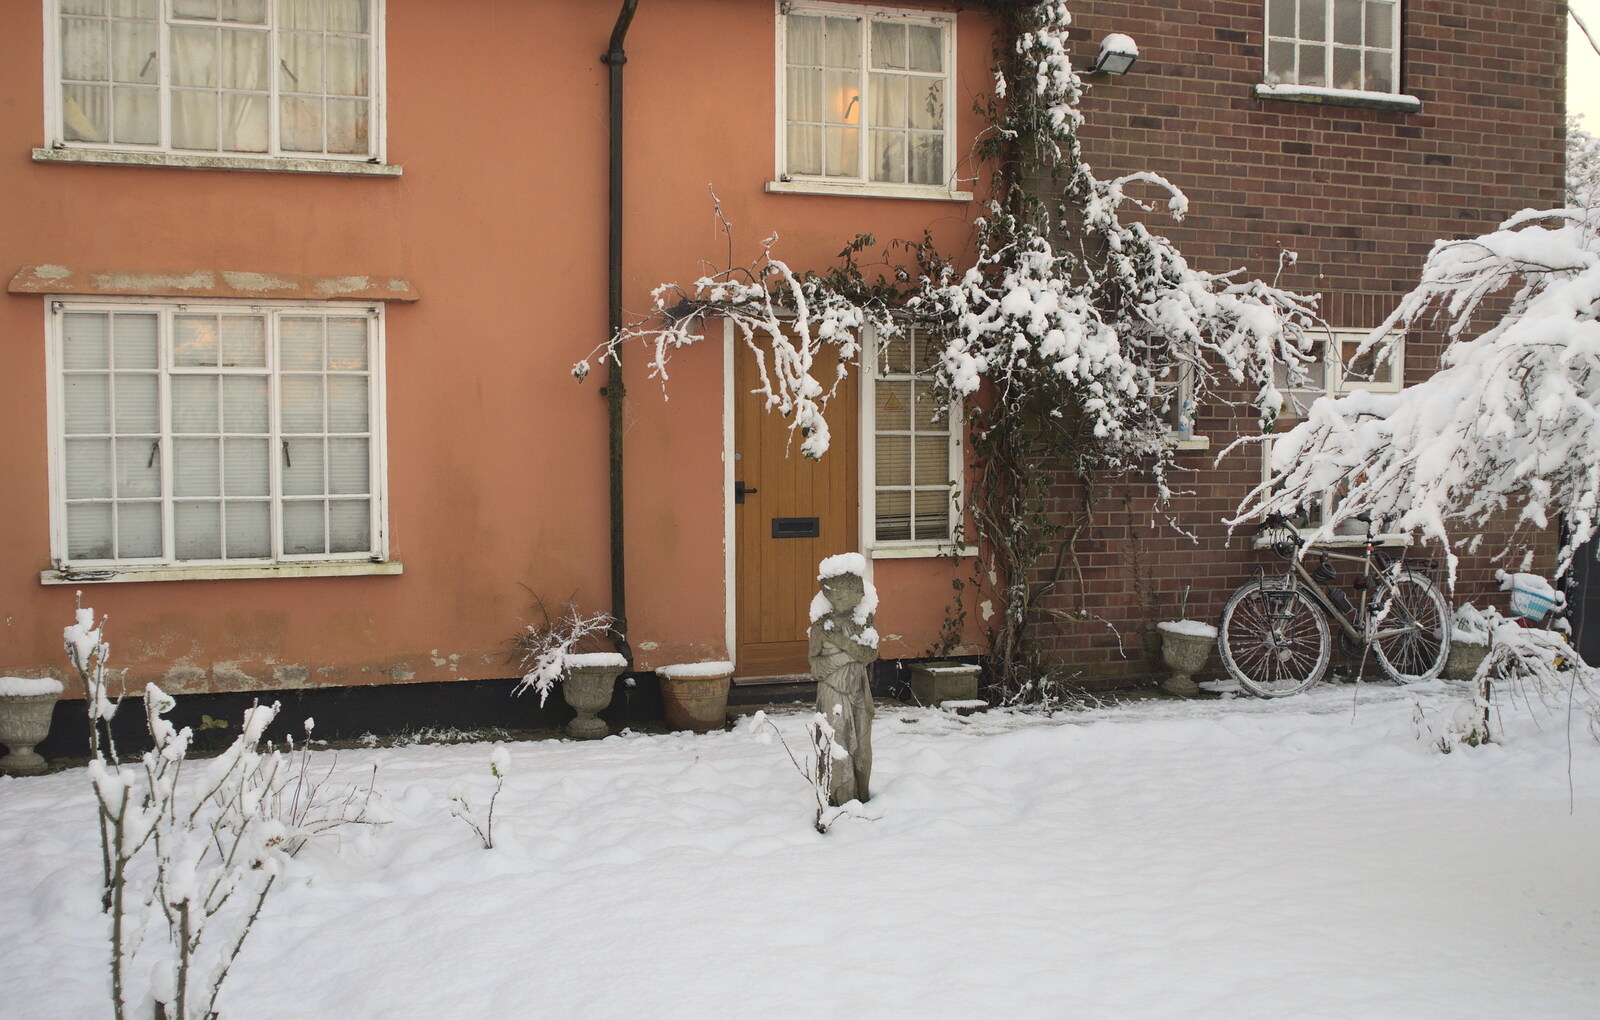 The front of the house from A Couple of Snow Days, Brome, Suffolk - 16th January 2013